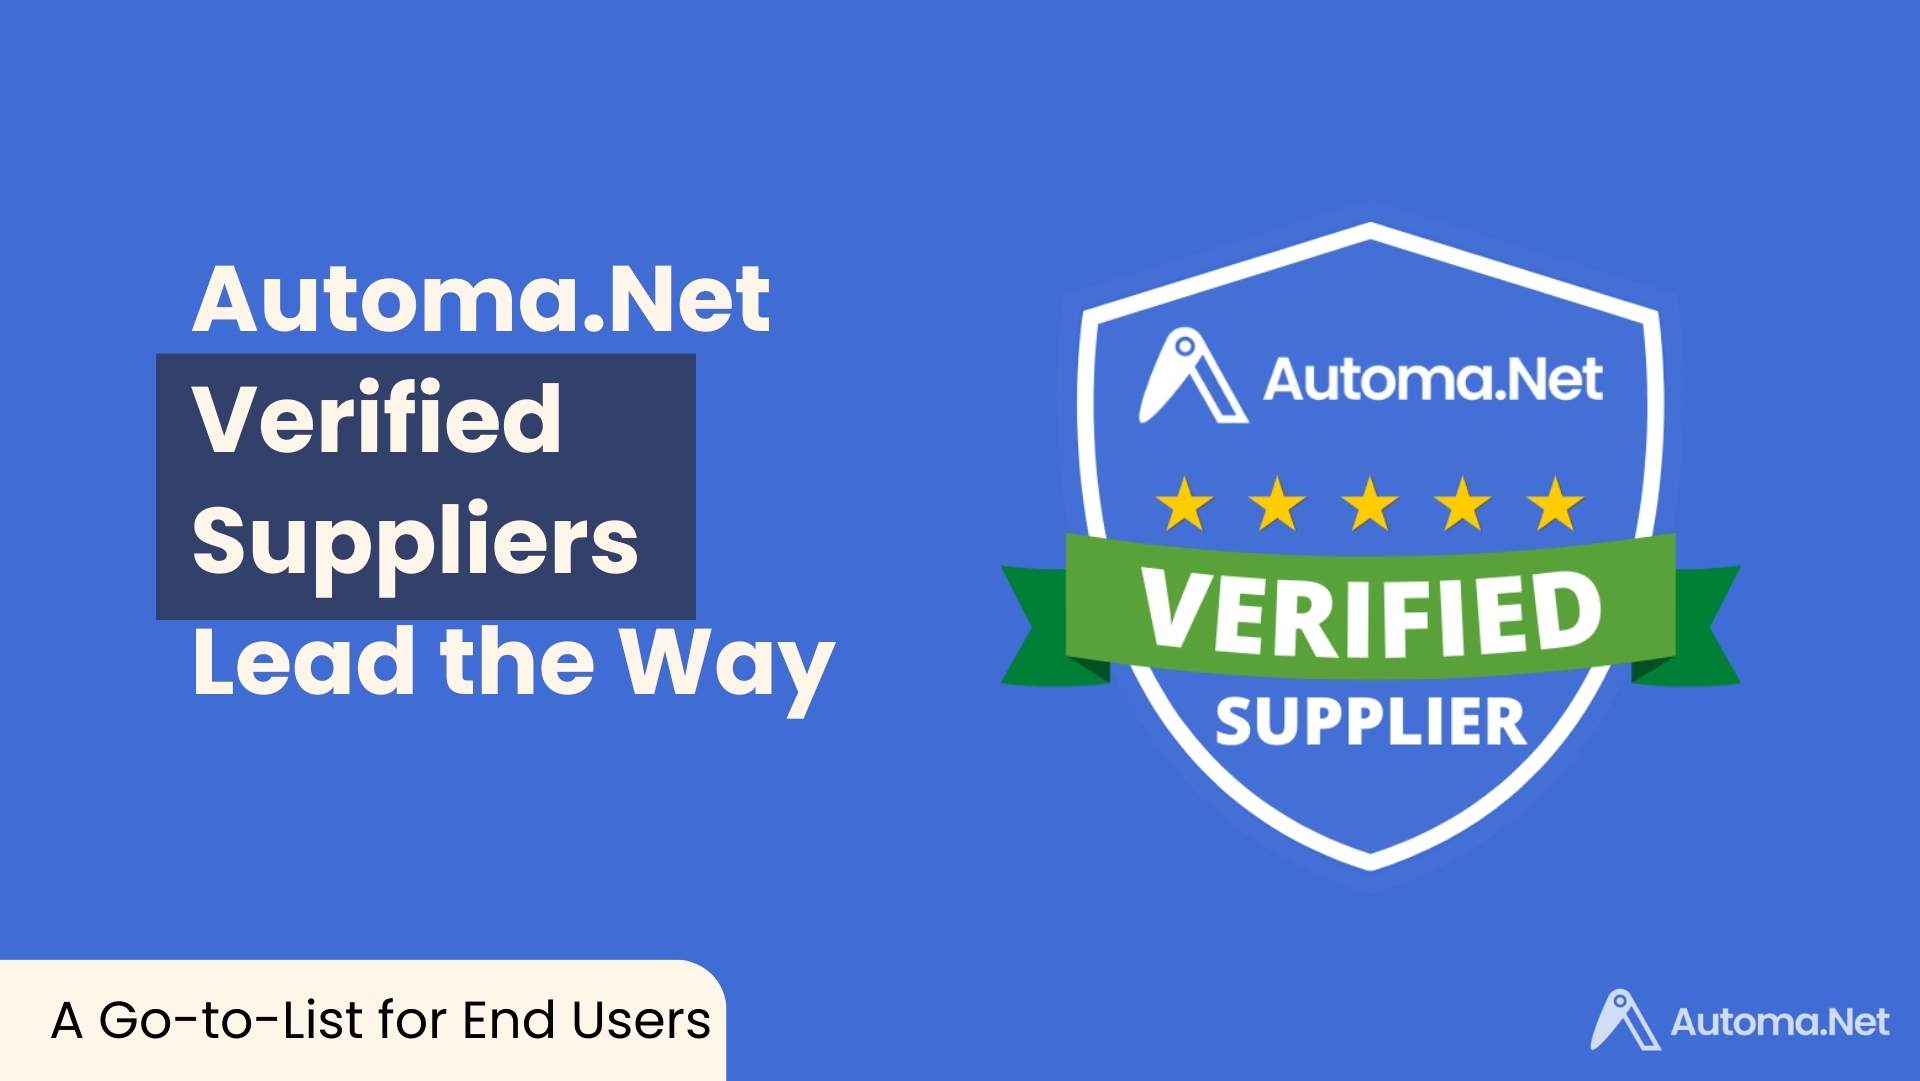 Verified Supplier Badge on Automa.Net